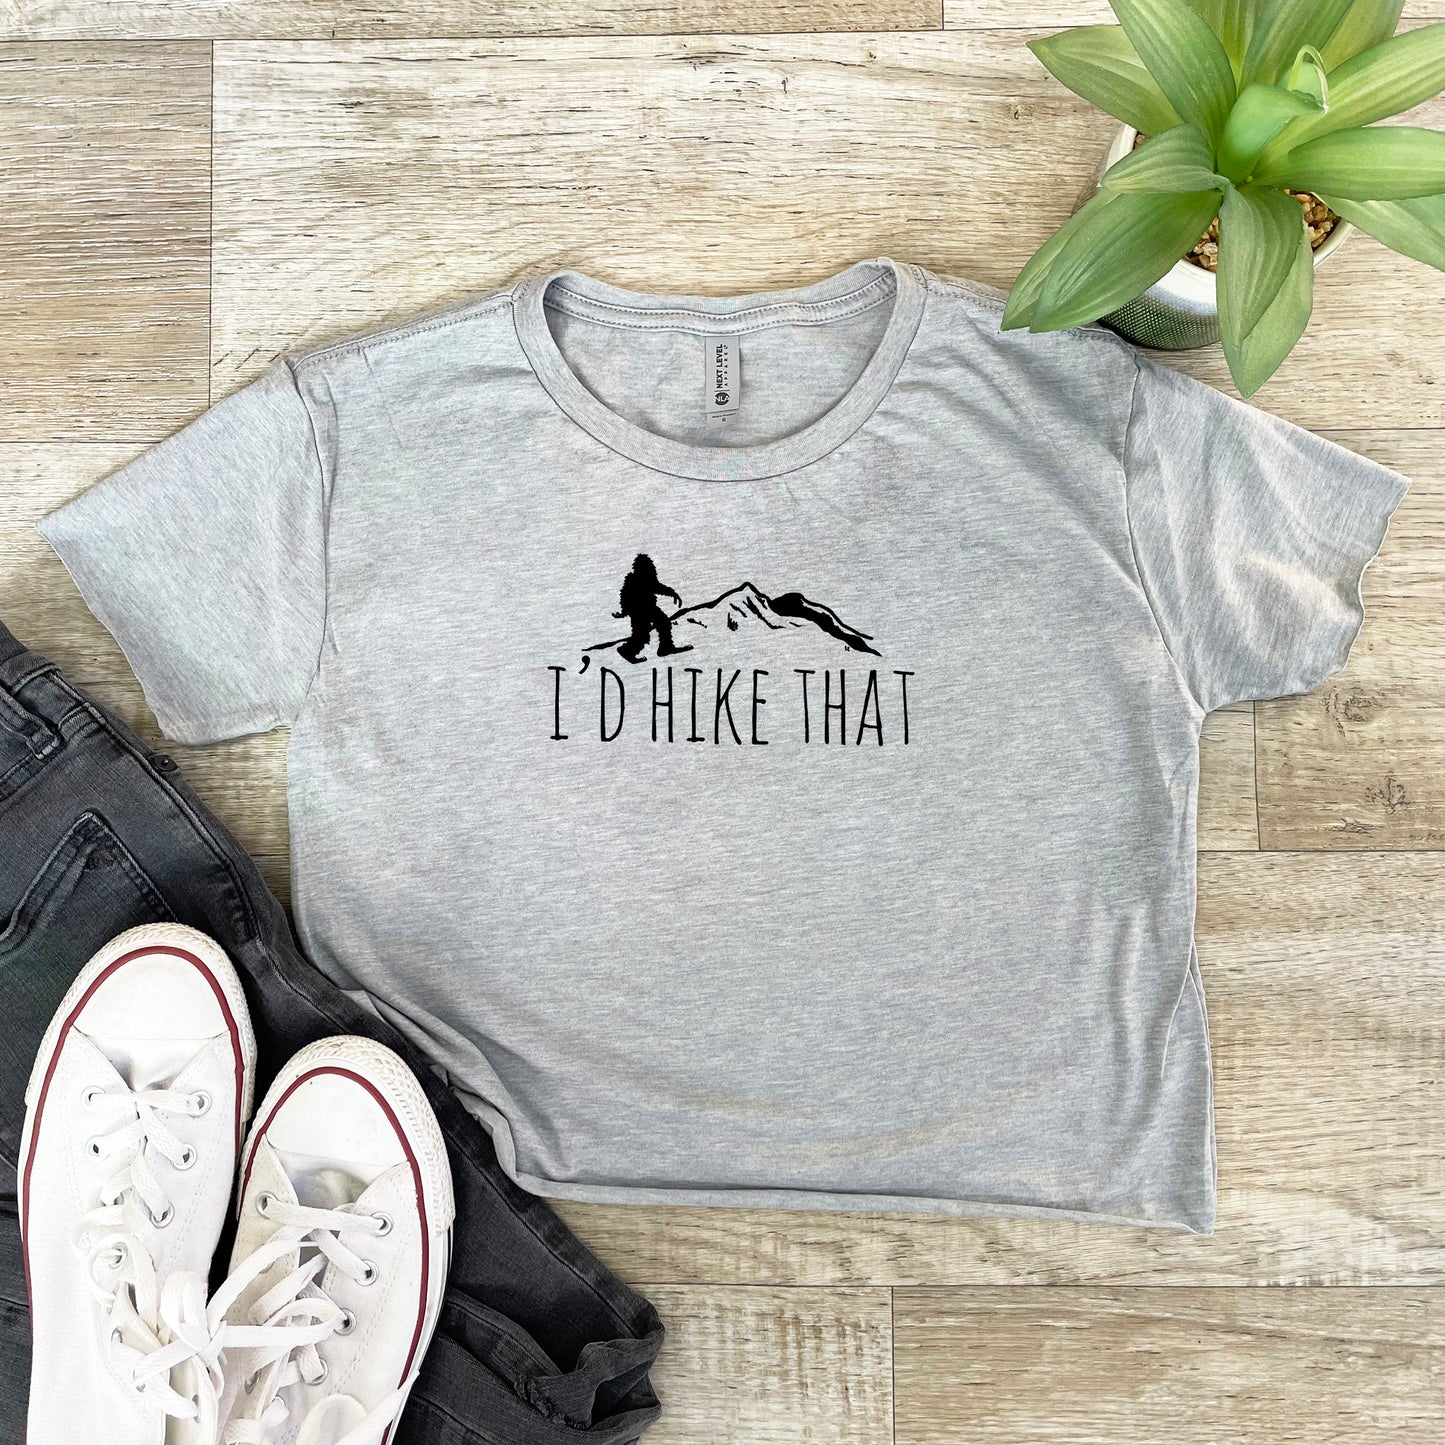 I'd Hike That - Women's Crop Tee - Heather Gray or Gold